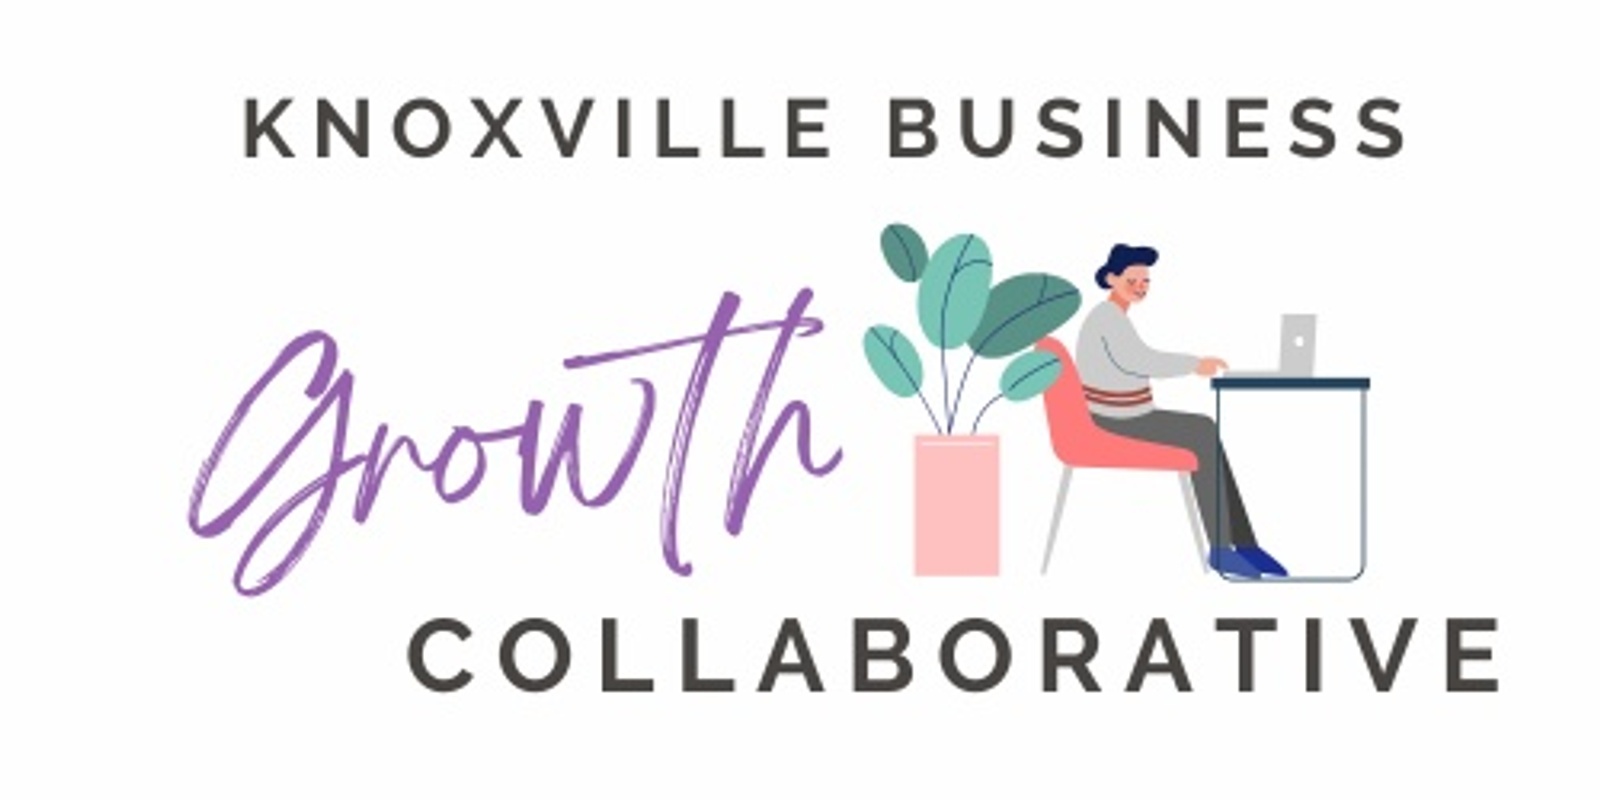 Banner image for Knoxville Business Growth Collaborative